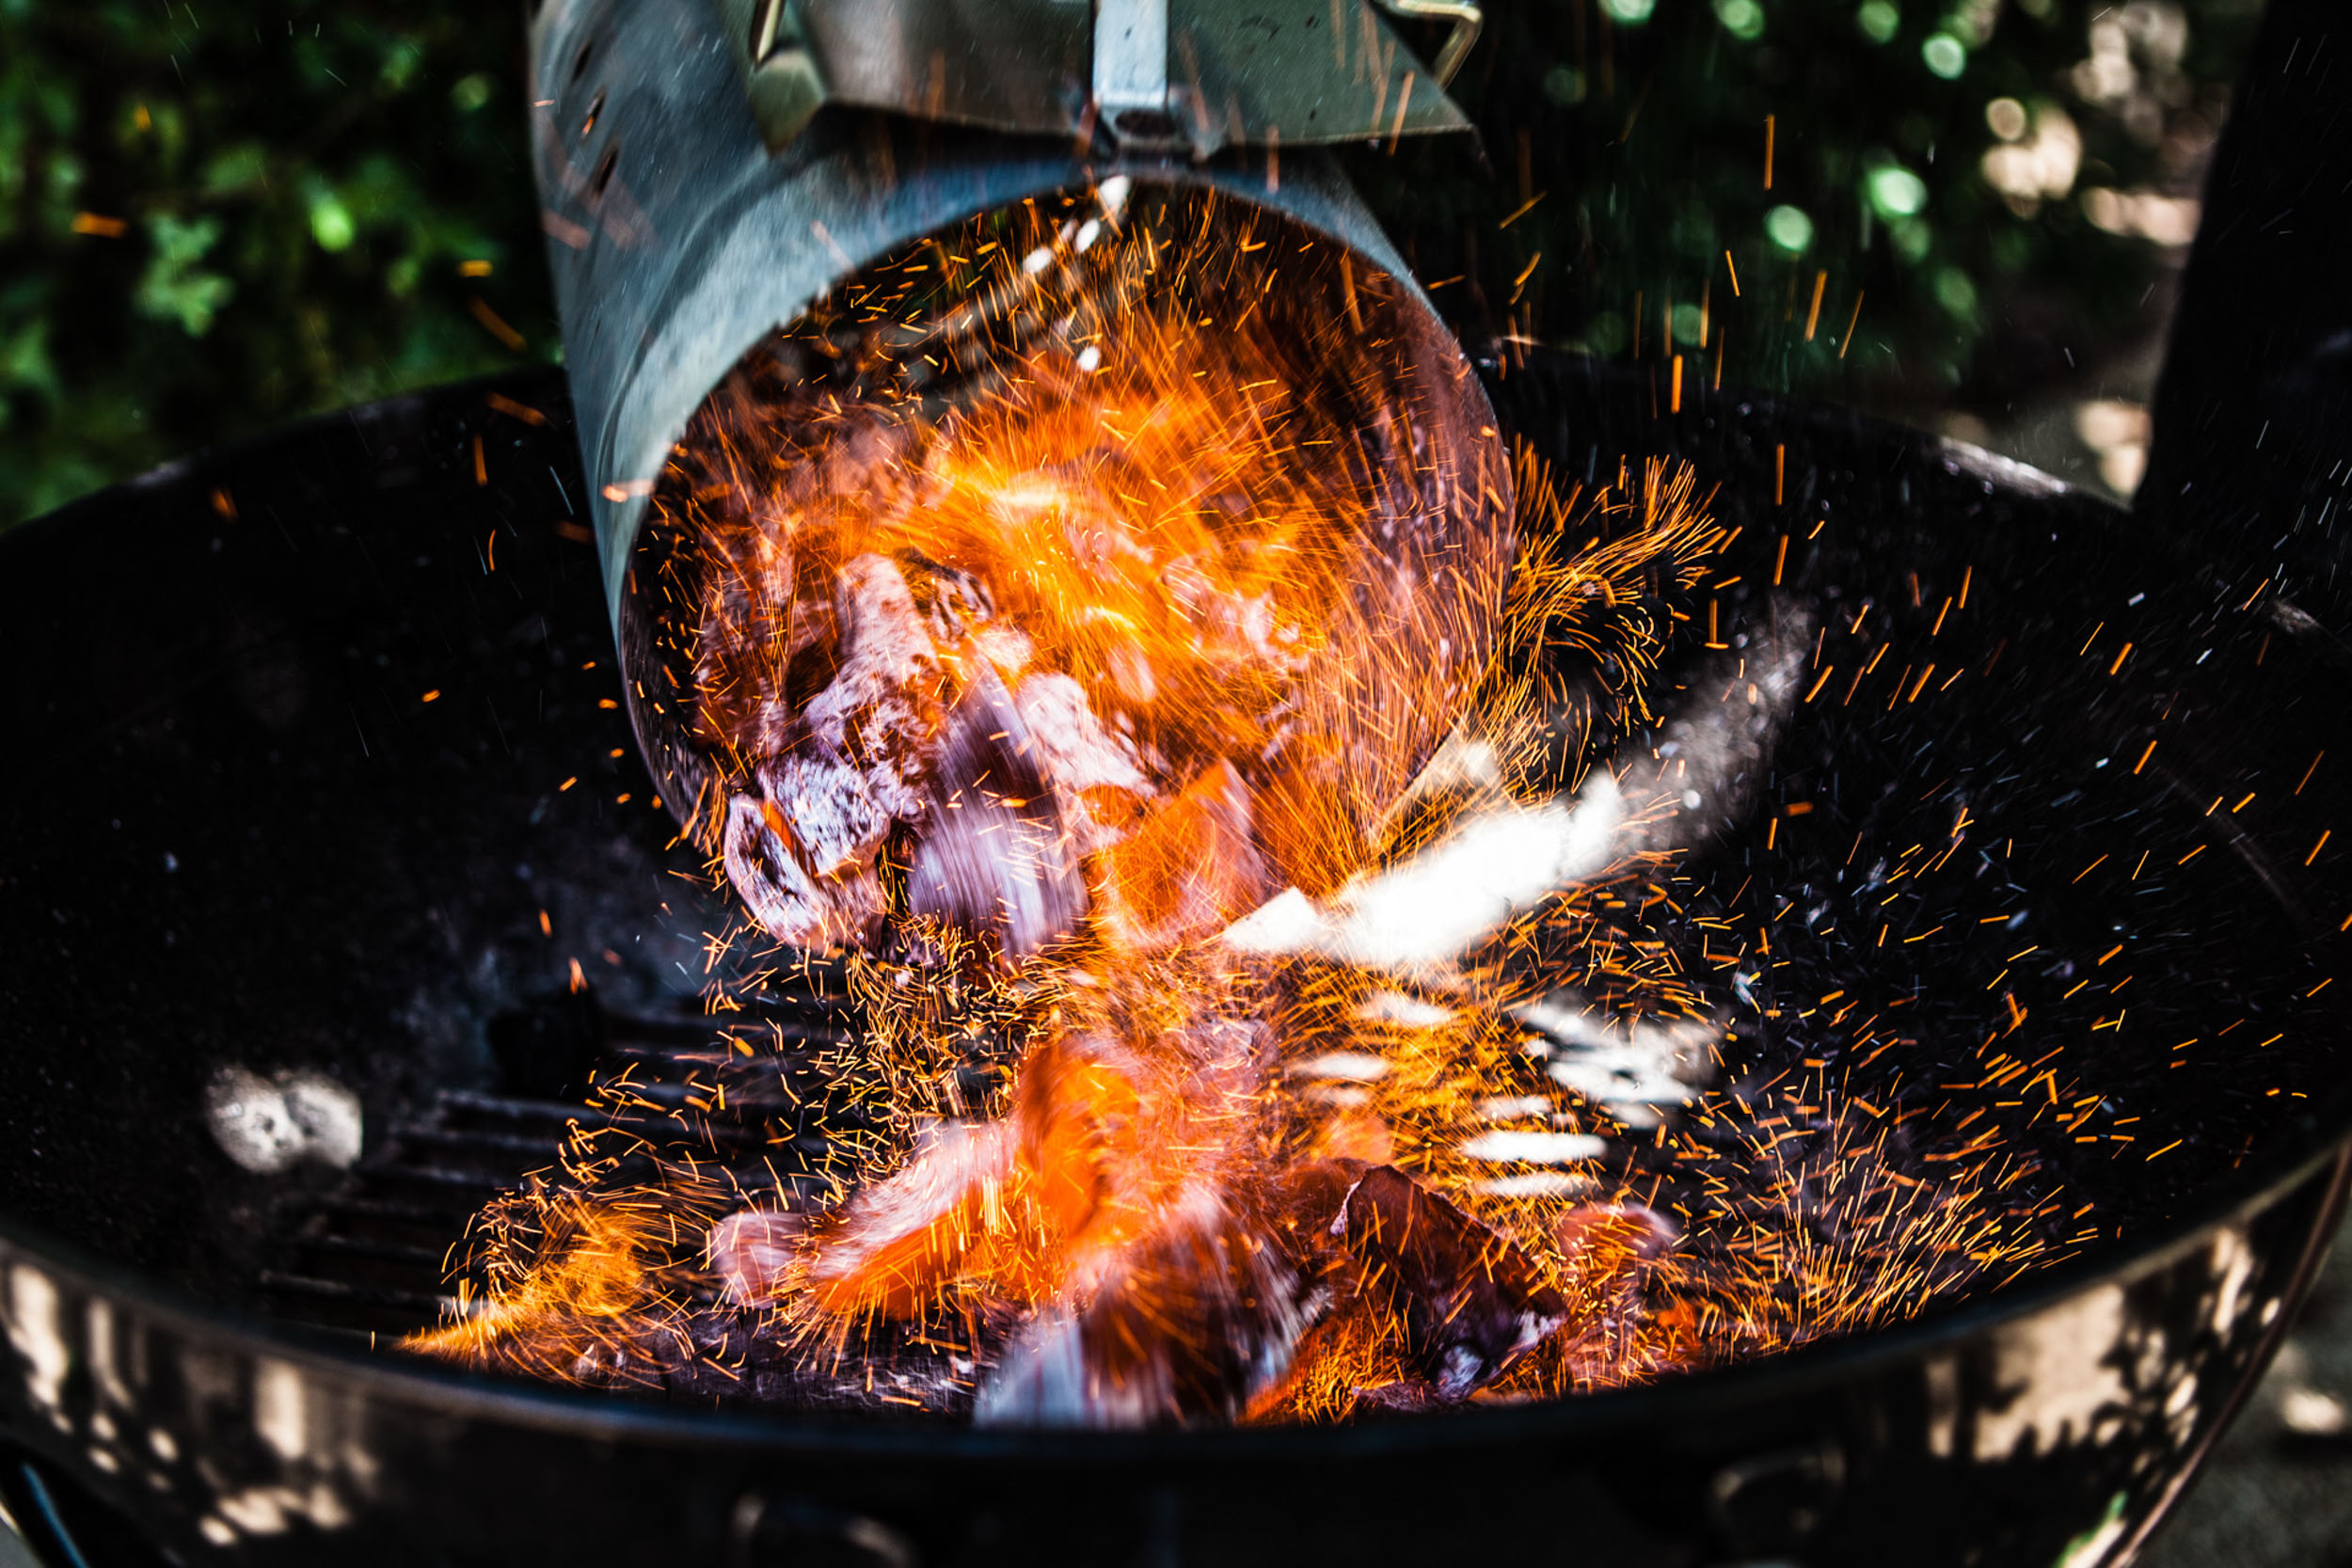 Los Angeles Food photographer - Grill Master  Cookbook hot coals  by Ray Kachatorian